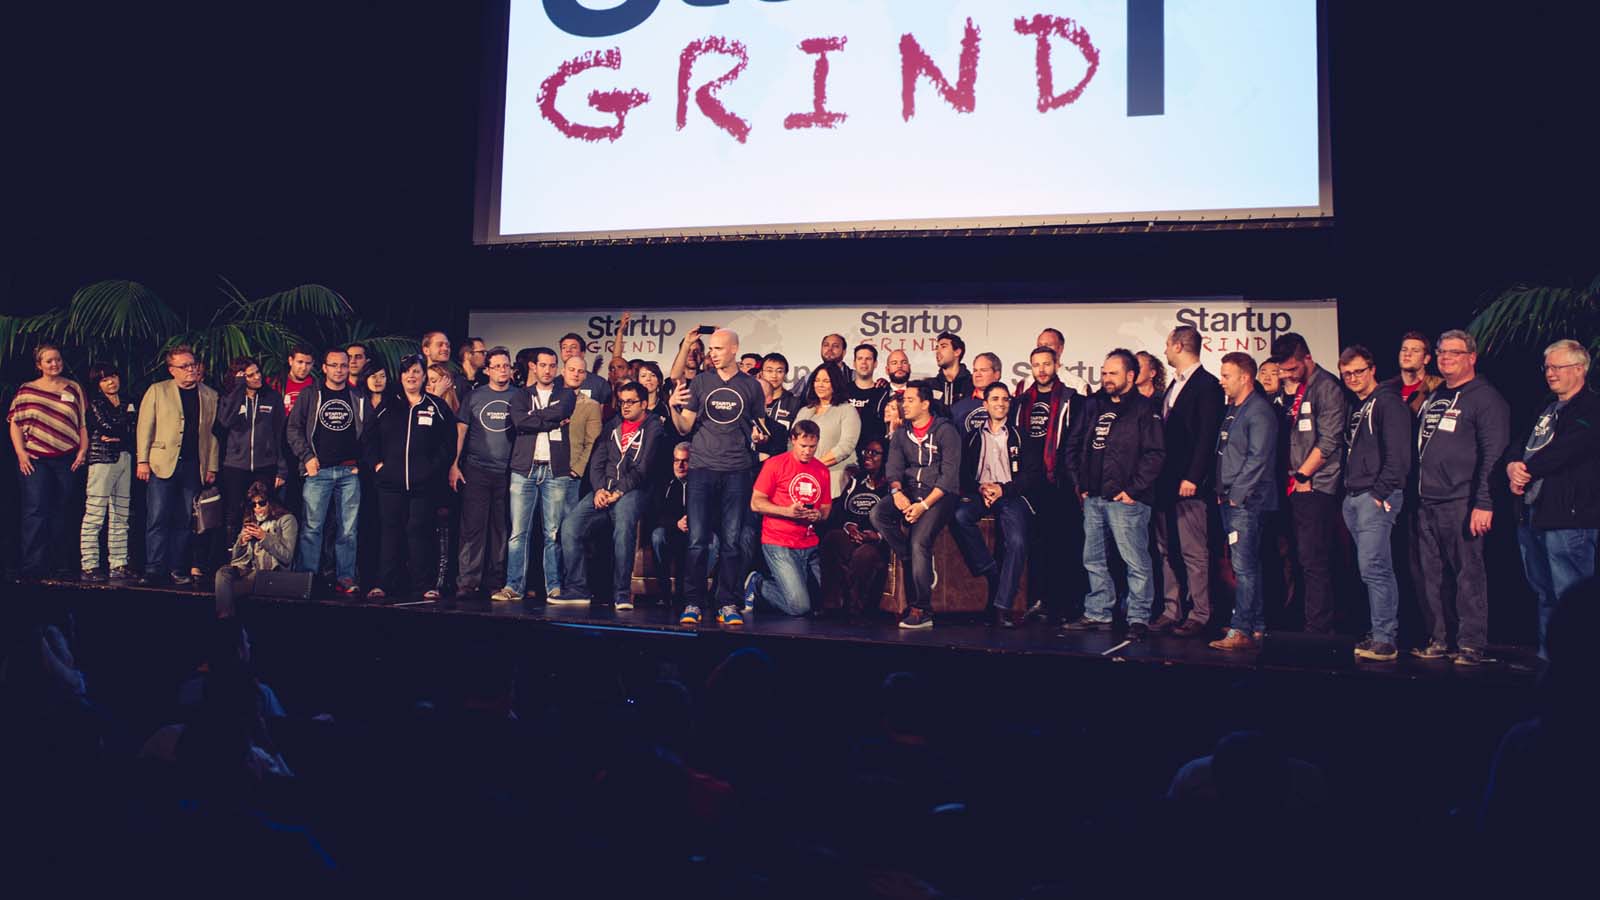 Startup Grind 2017 Global Conference in Redwood City, Silicon Valley